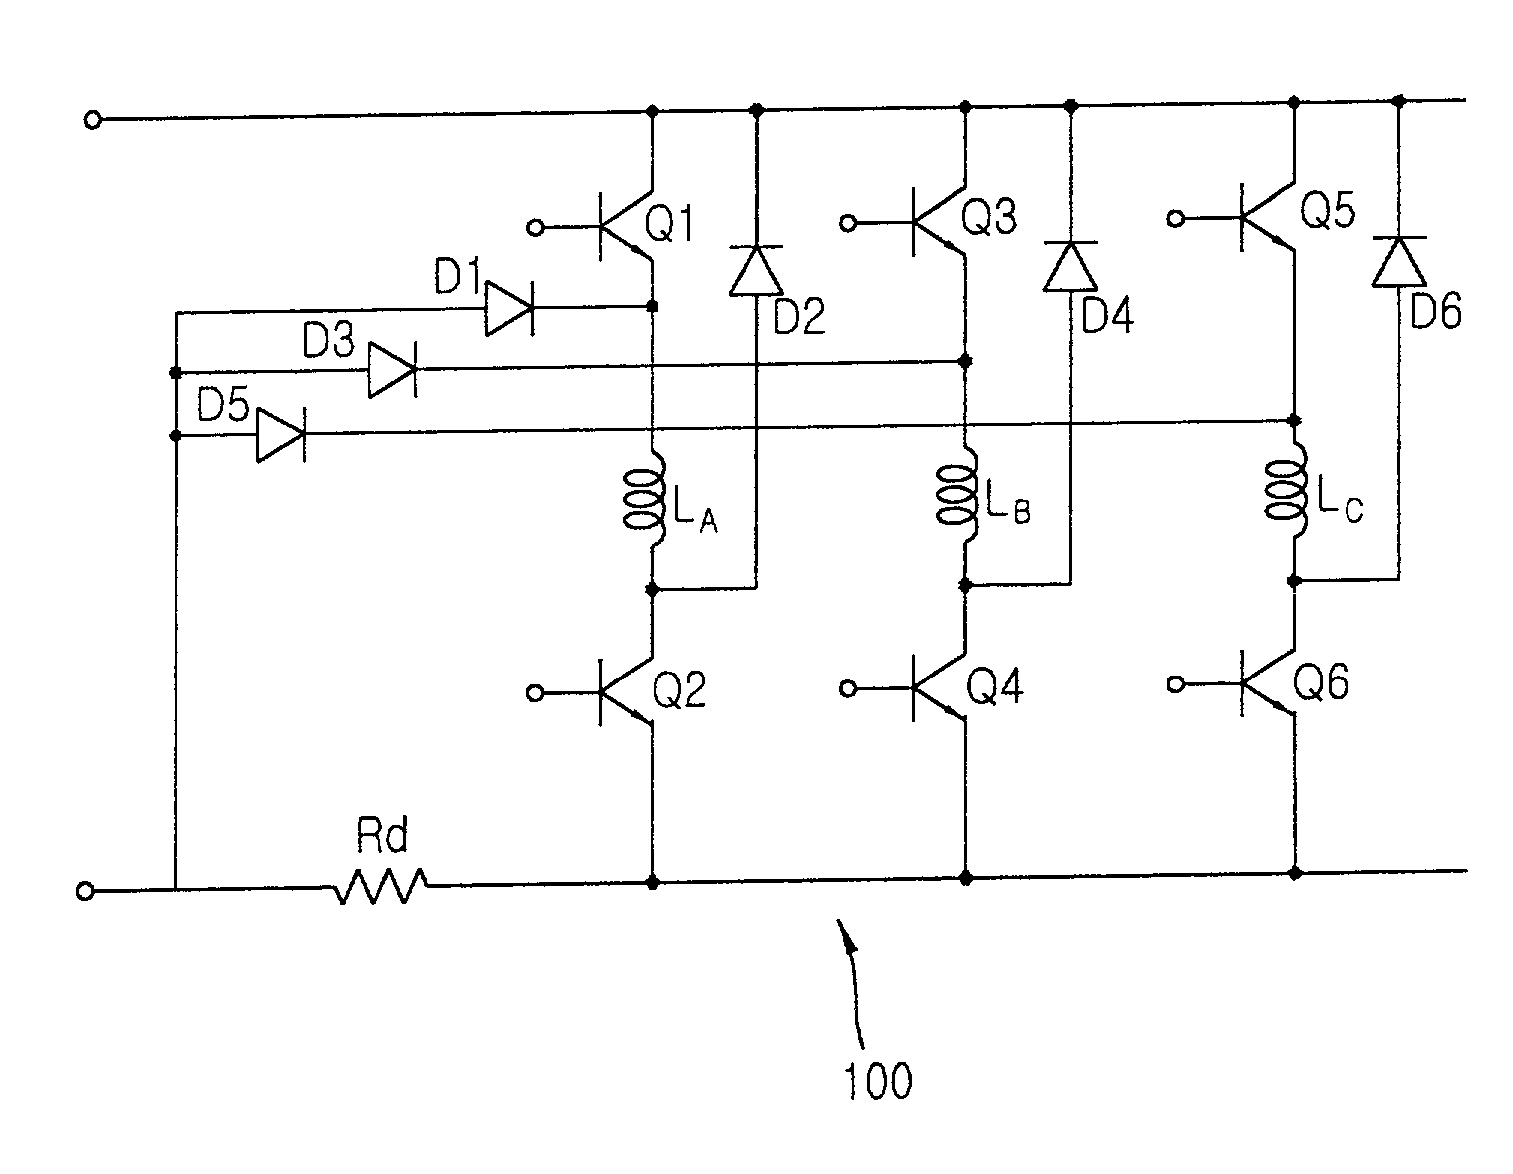 Method for controlling operating of switched reluctance motor (SRM)